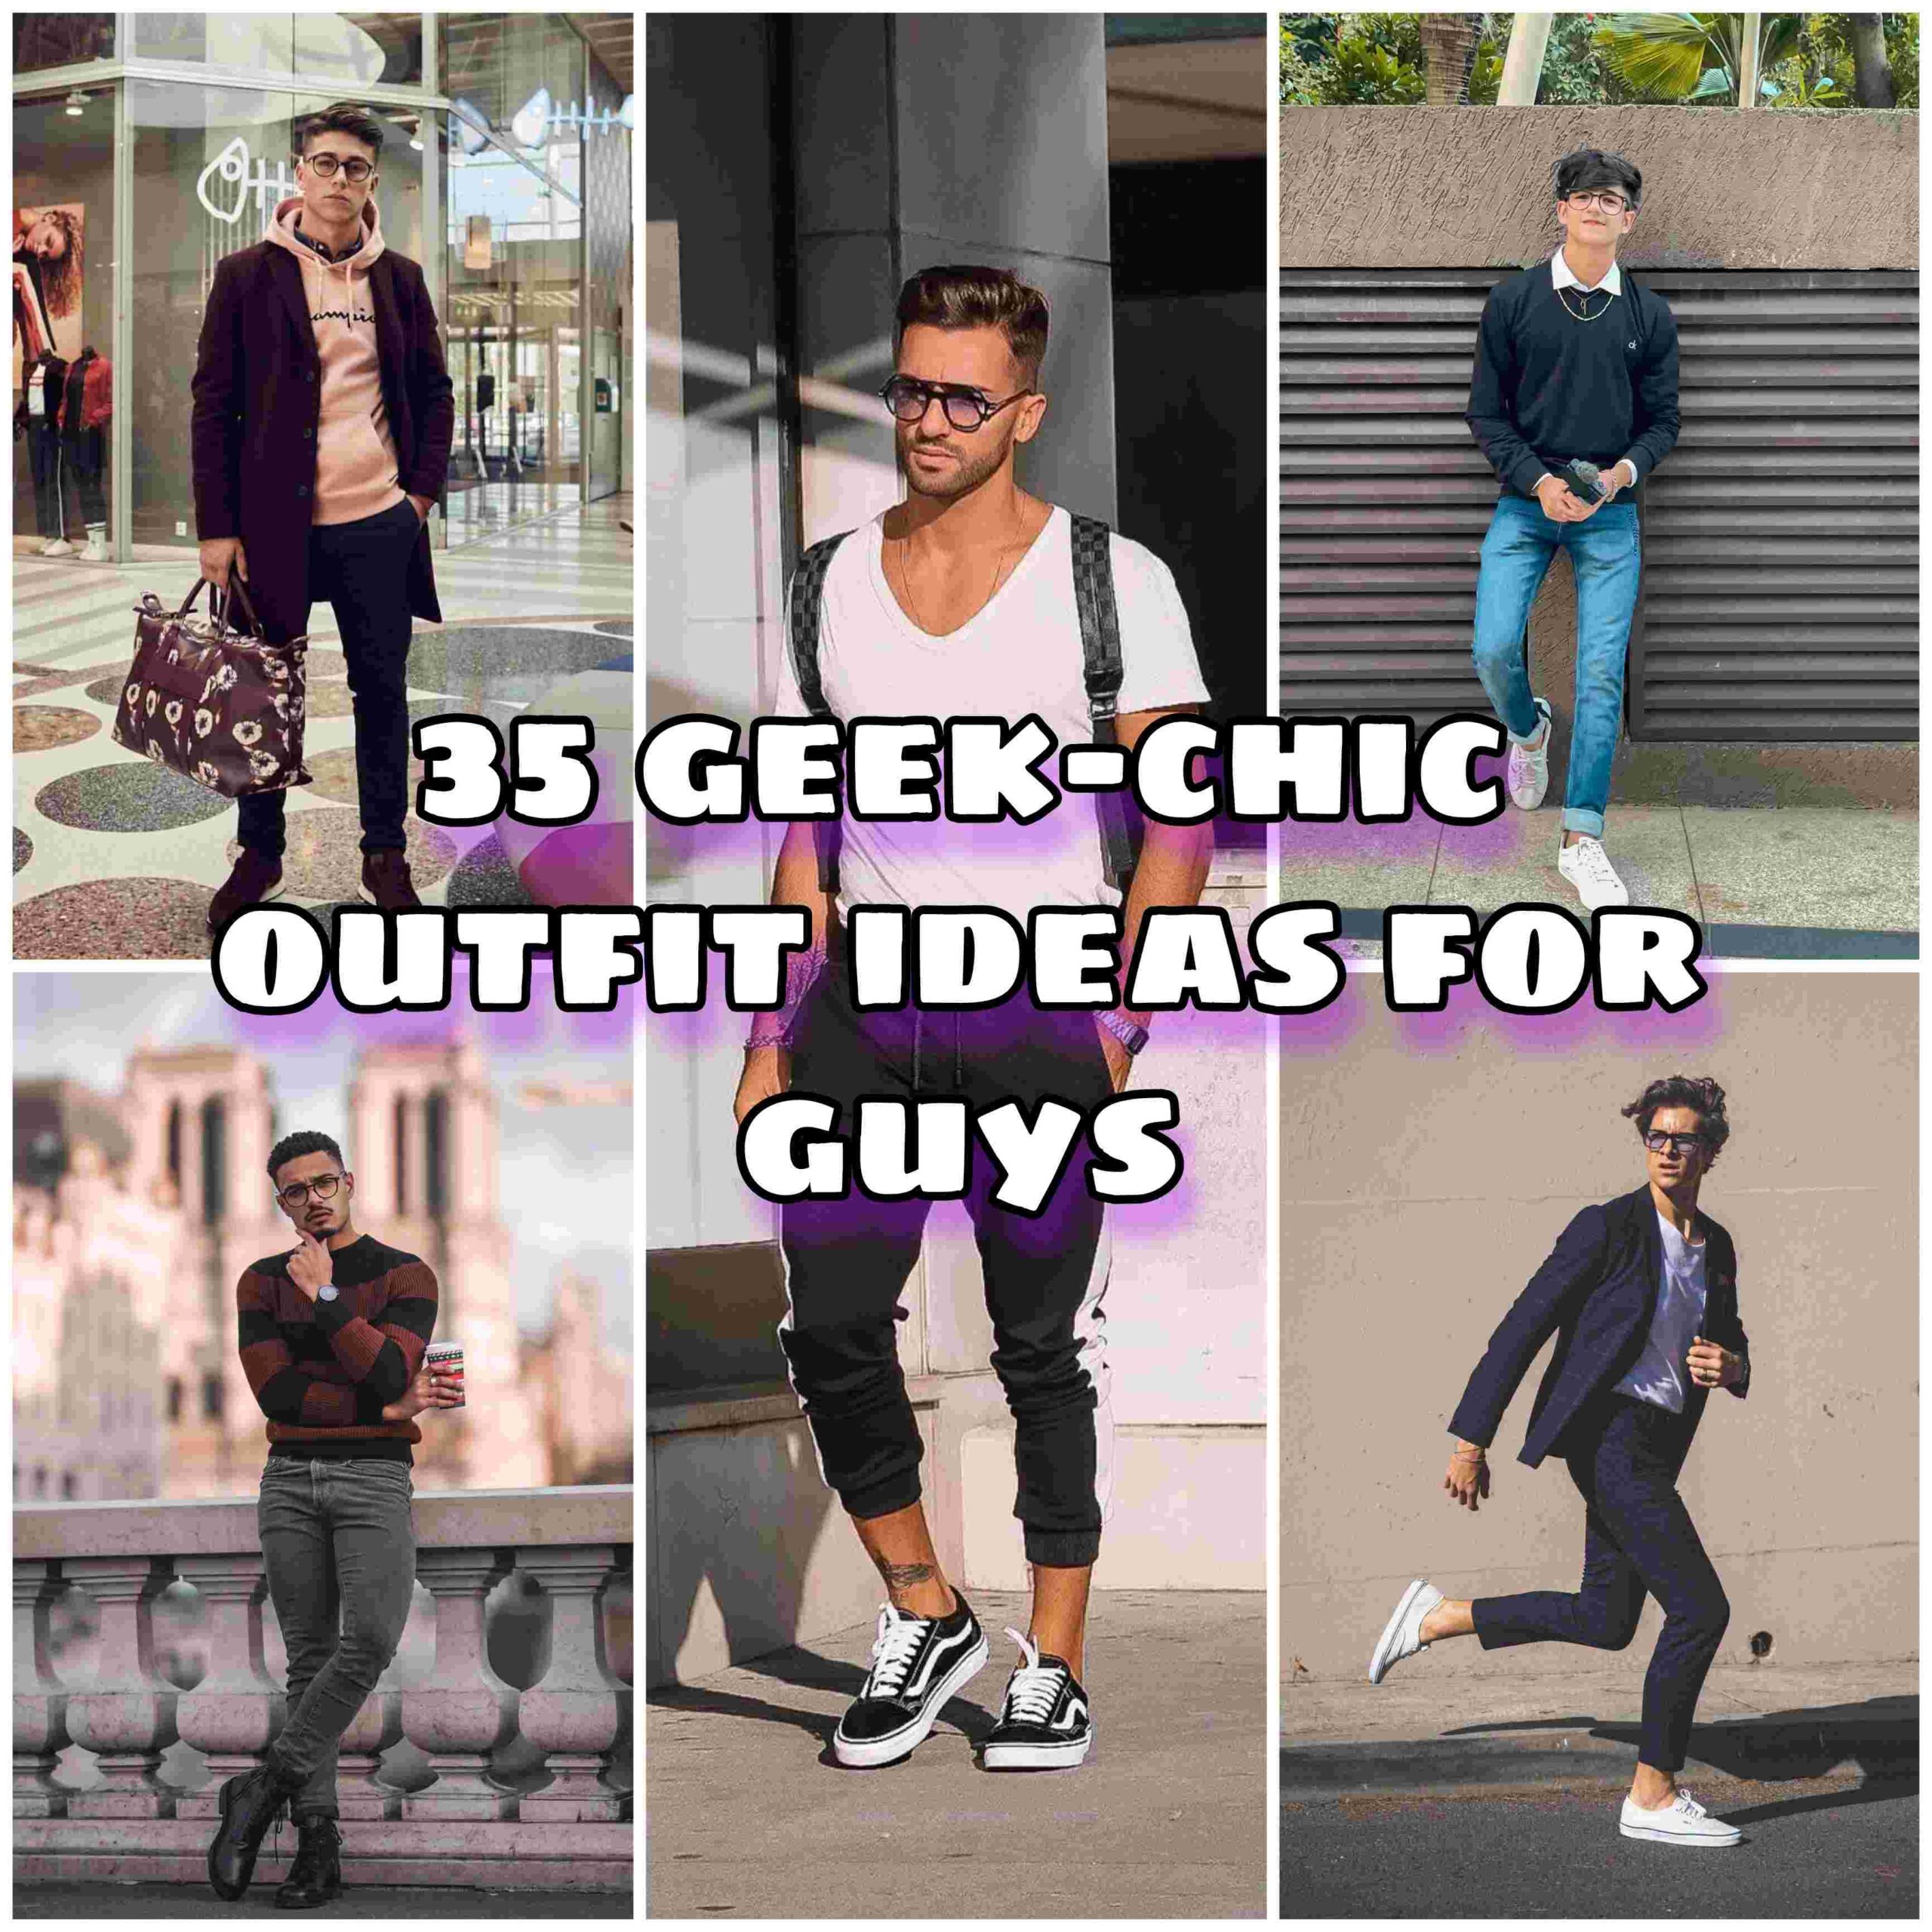 Geek chic outfit ideas